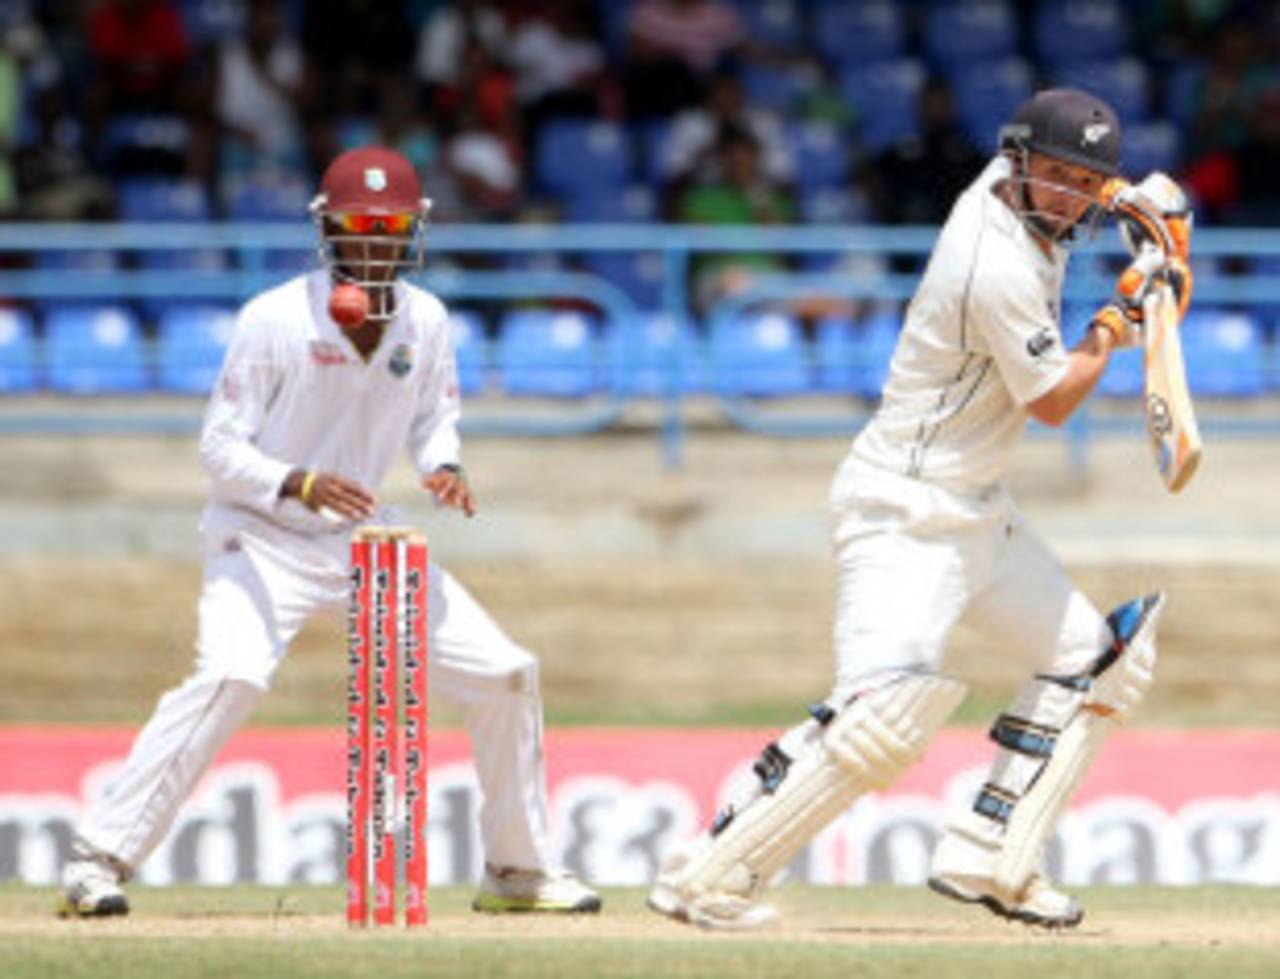 BJ Watling provided some resistance in the lower-middle order, West Indies v New Zealand, 2nd Test, Trinidad, 4th day, June 19, 2014